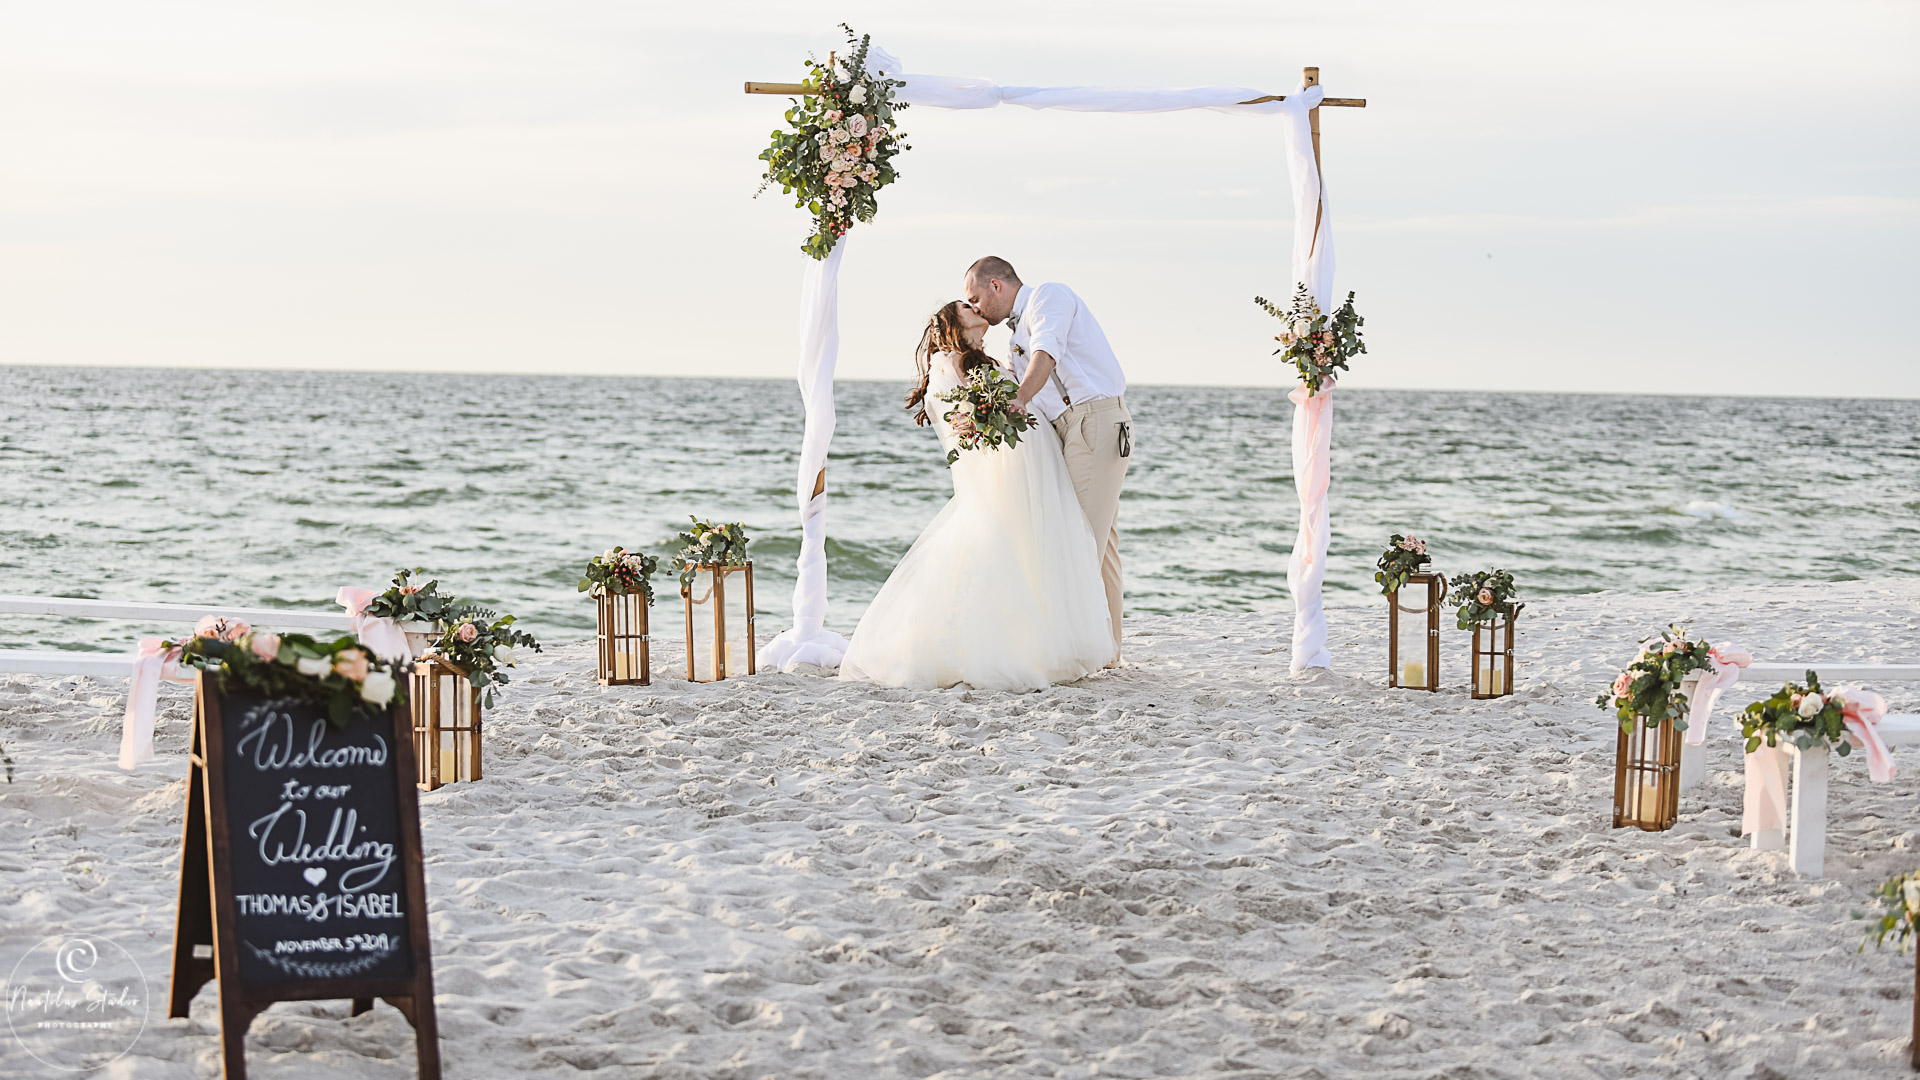 Photo of elopement beach wedding in Naples Florida showing couple kissing under the archway